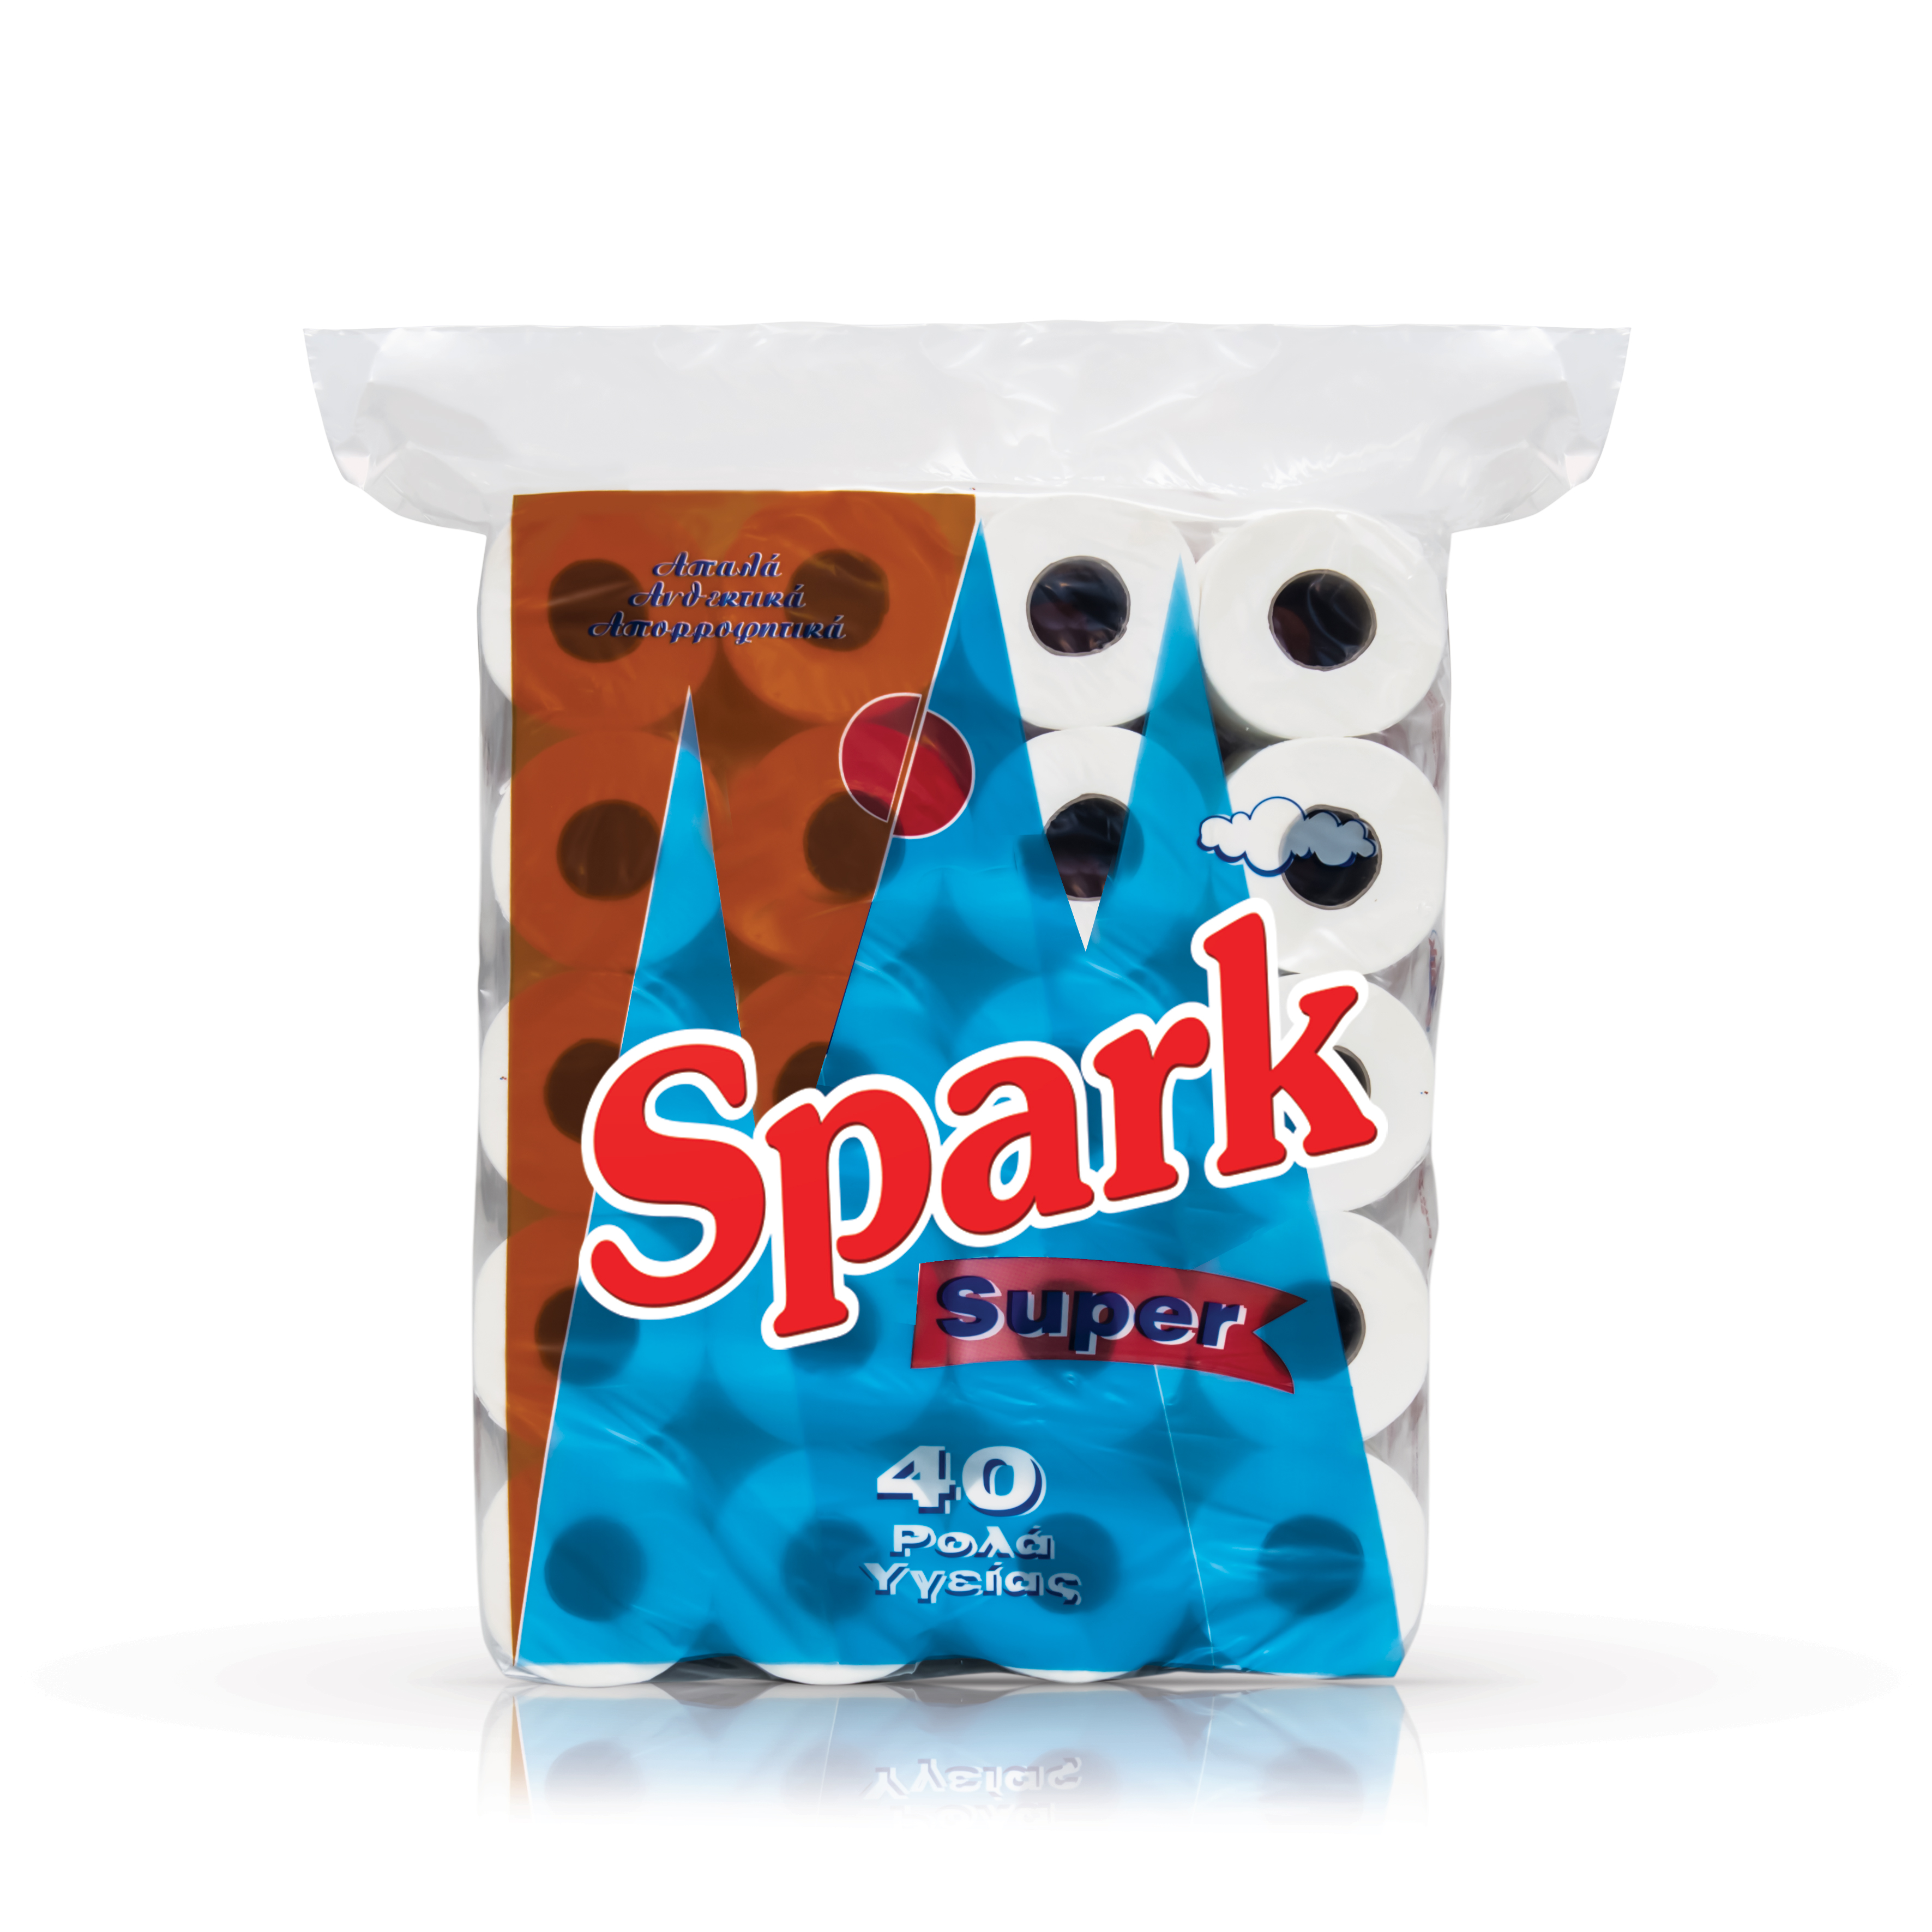 SPARK TOILET ROLL PROFESSIONAL USE 115gr. - 40 rolls